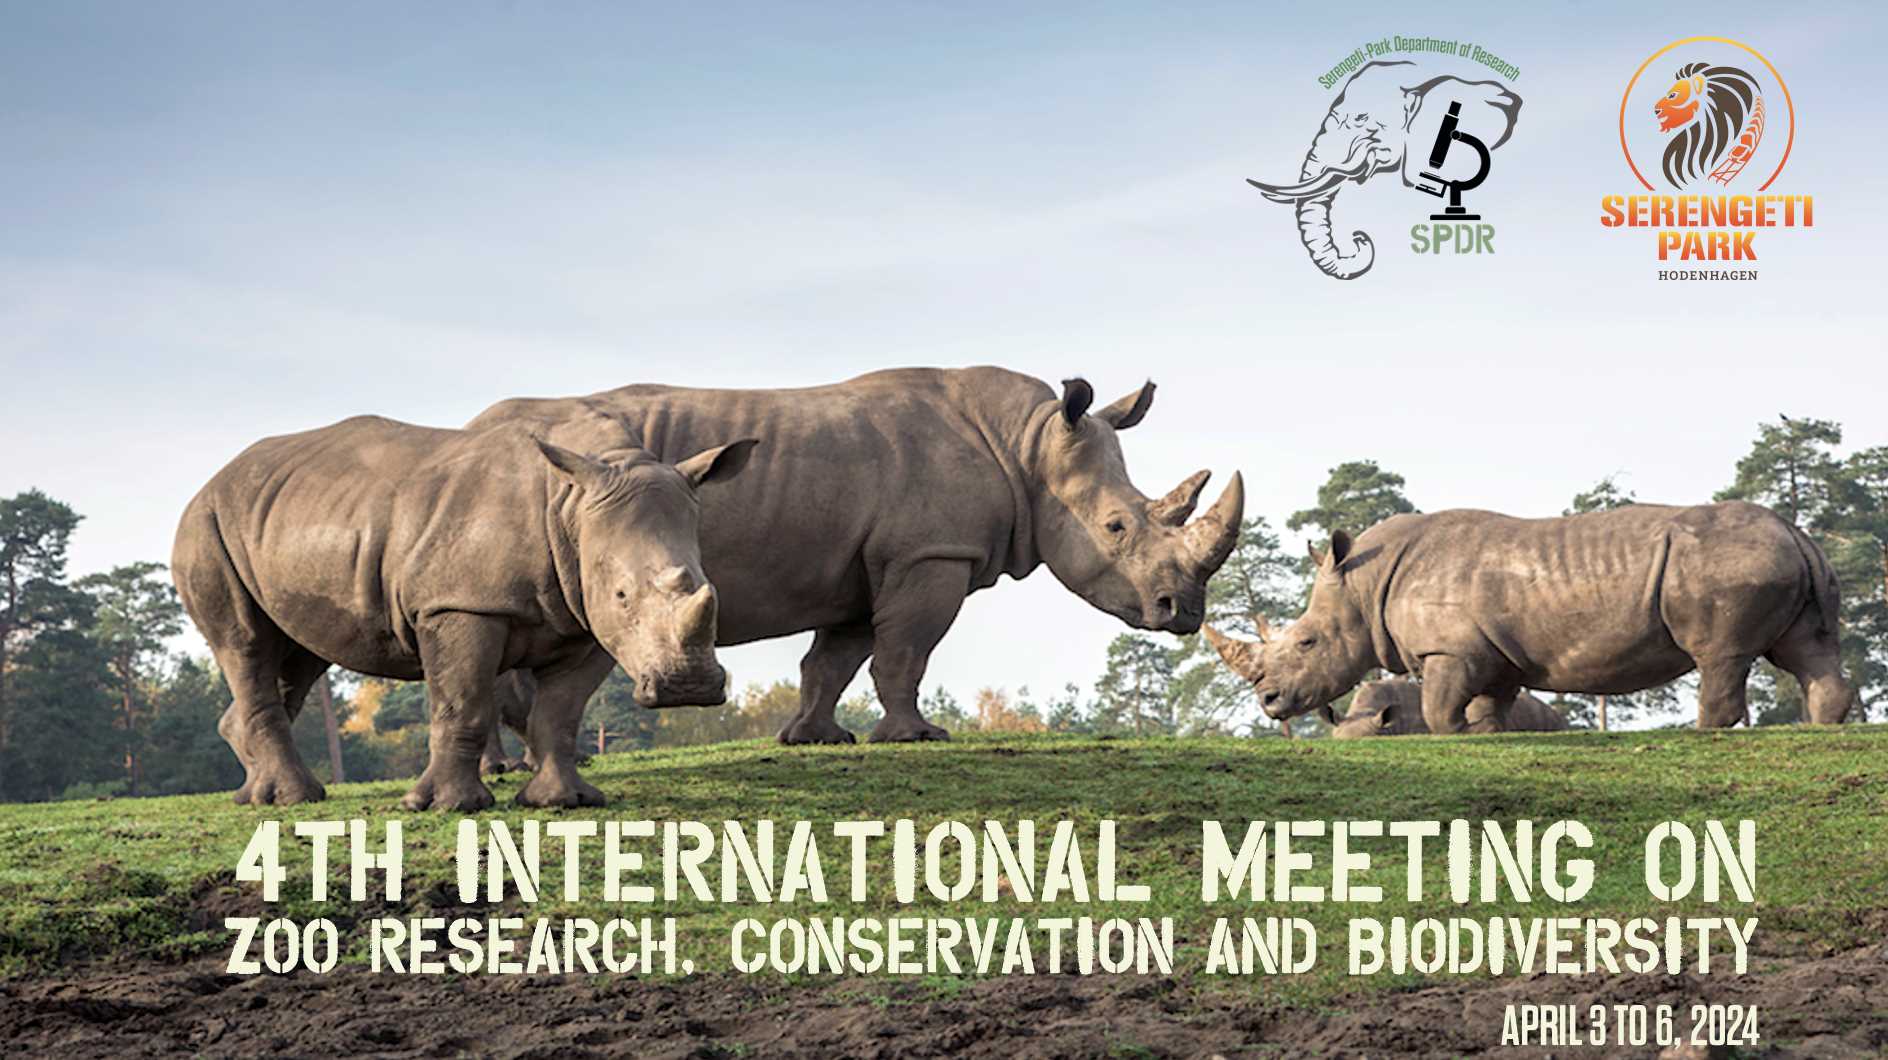 4th International Meeting on Zoo Research, Conservation and Biodiversity